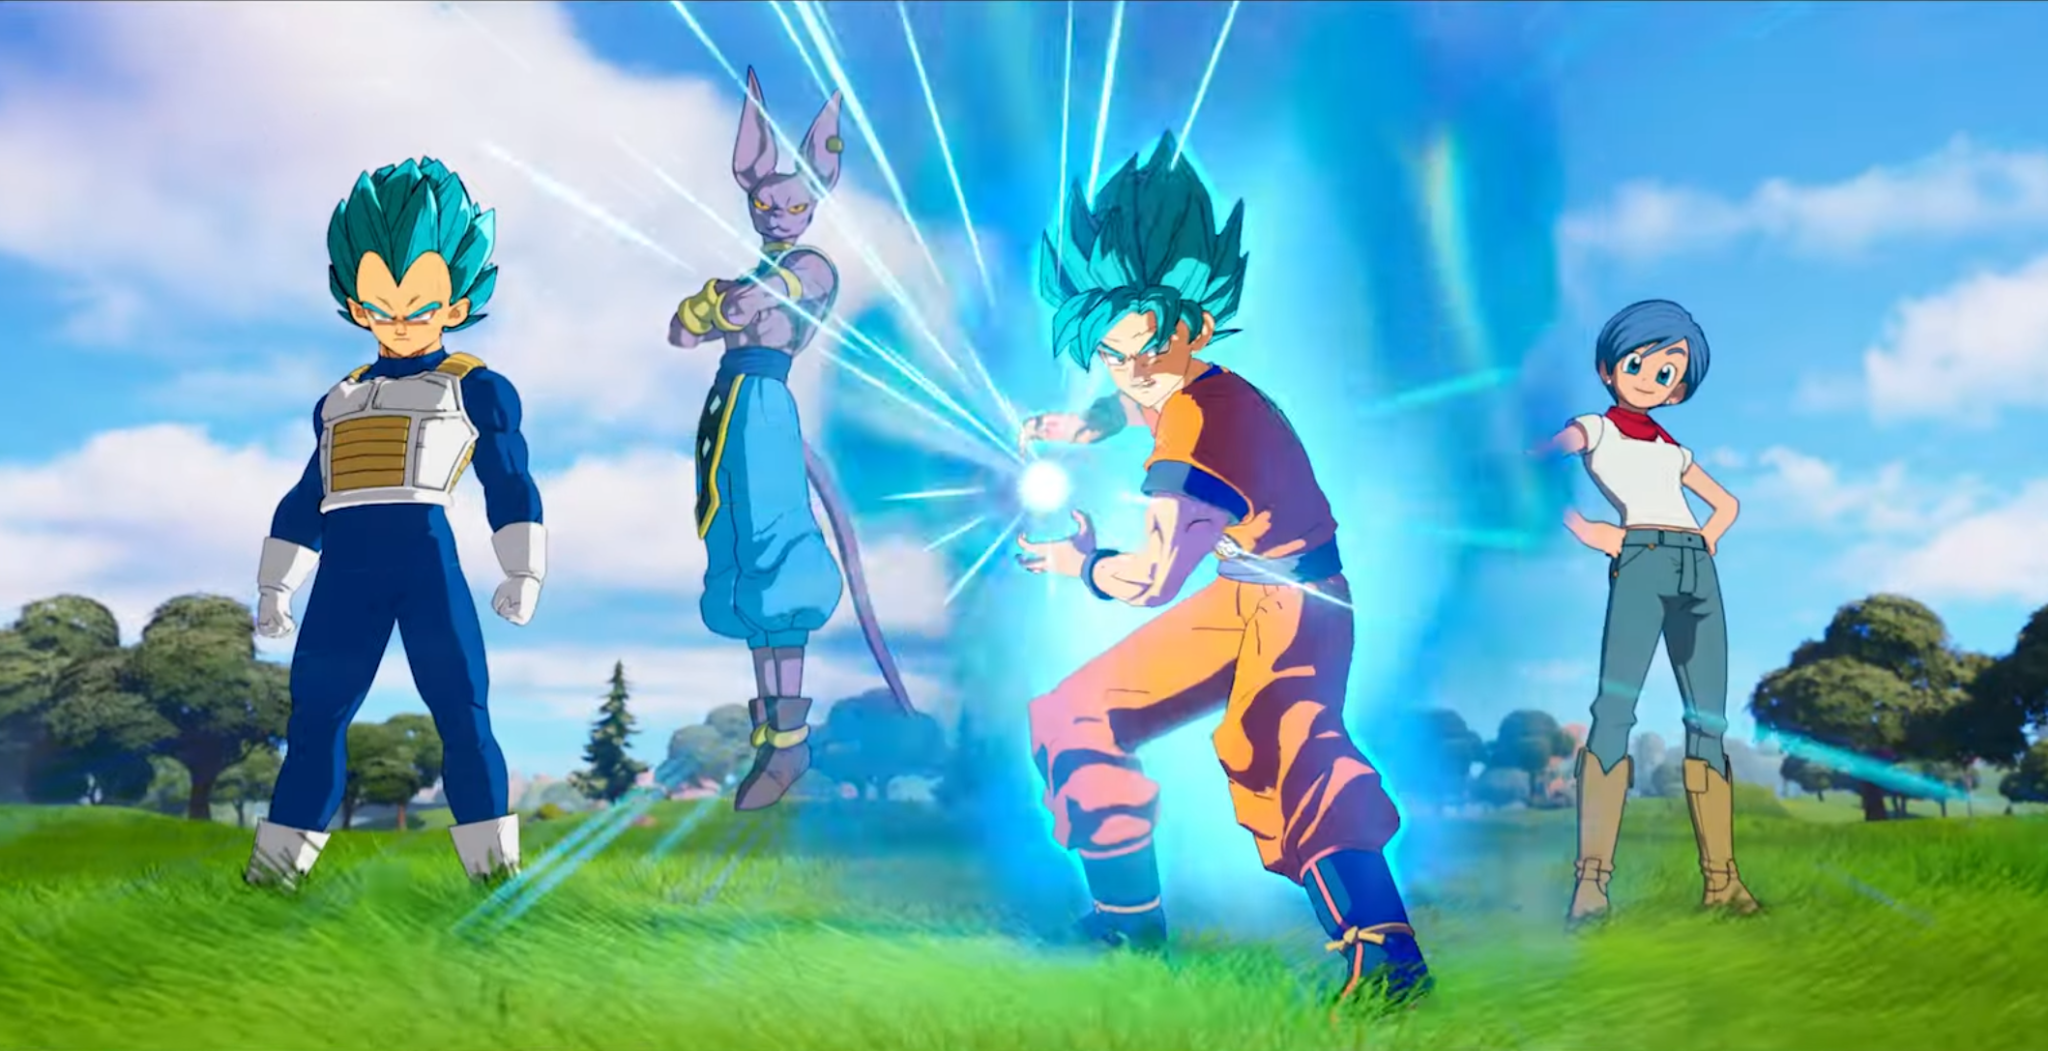 Fortnite is getting a surprise Dragon Ball Super crossover tomorrow